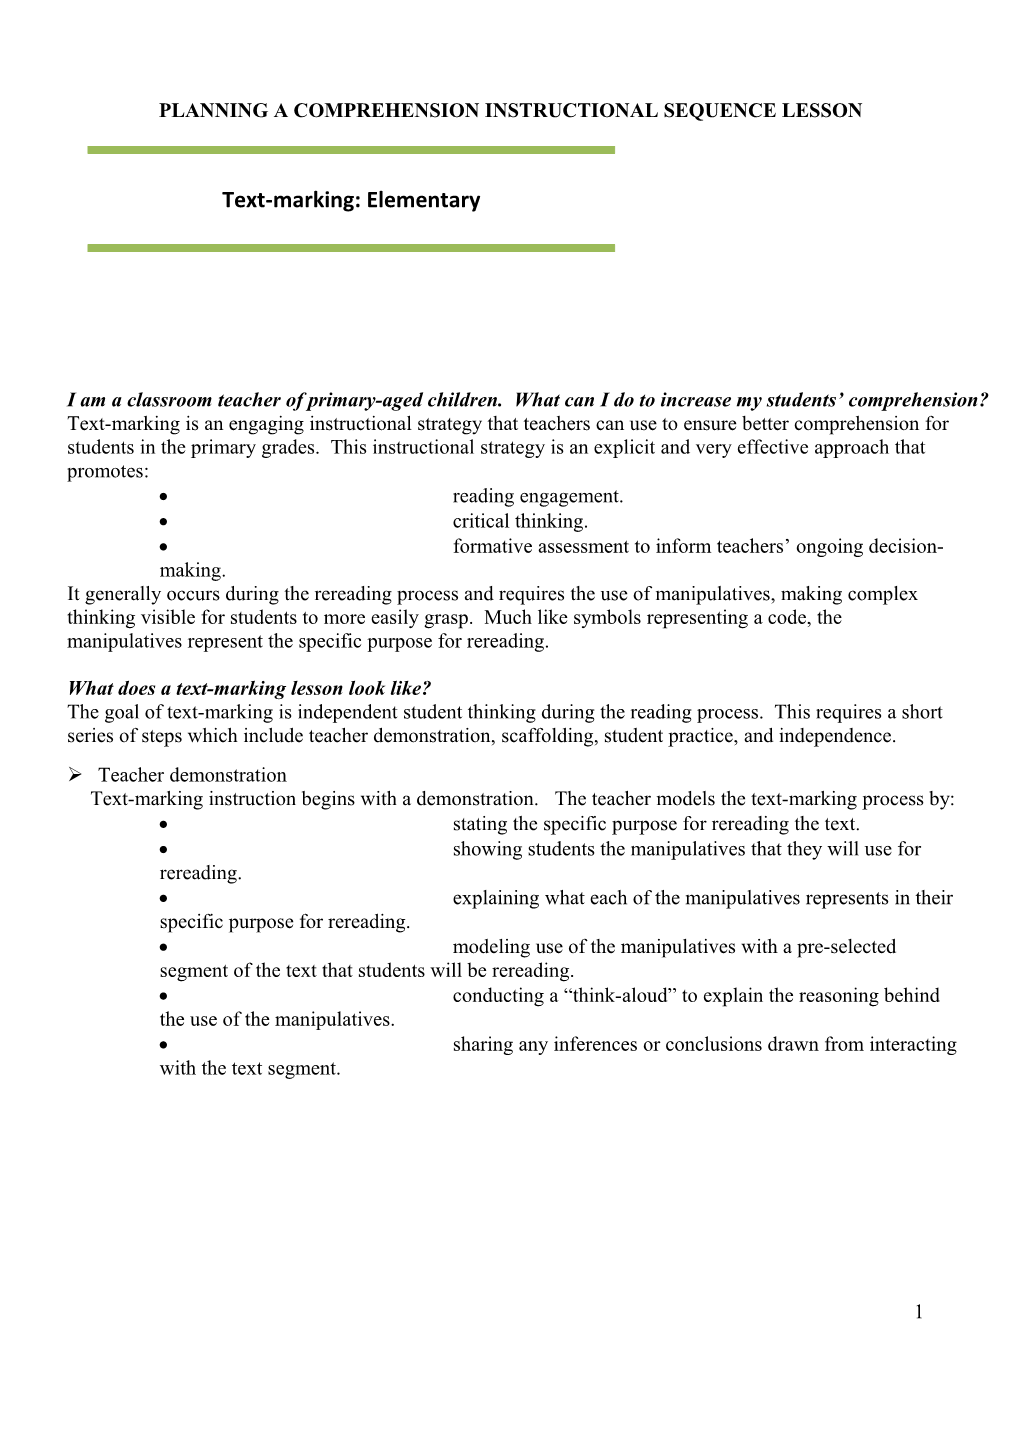 Planning a Comprehension Instructional Sequence Lesson